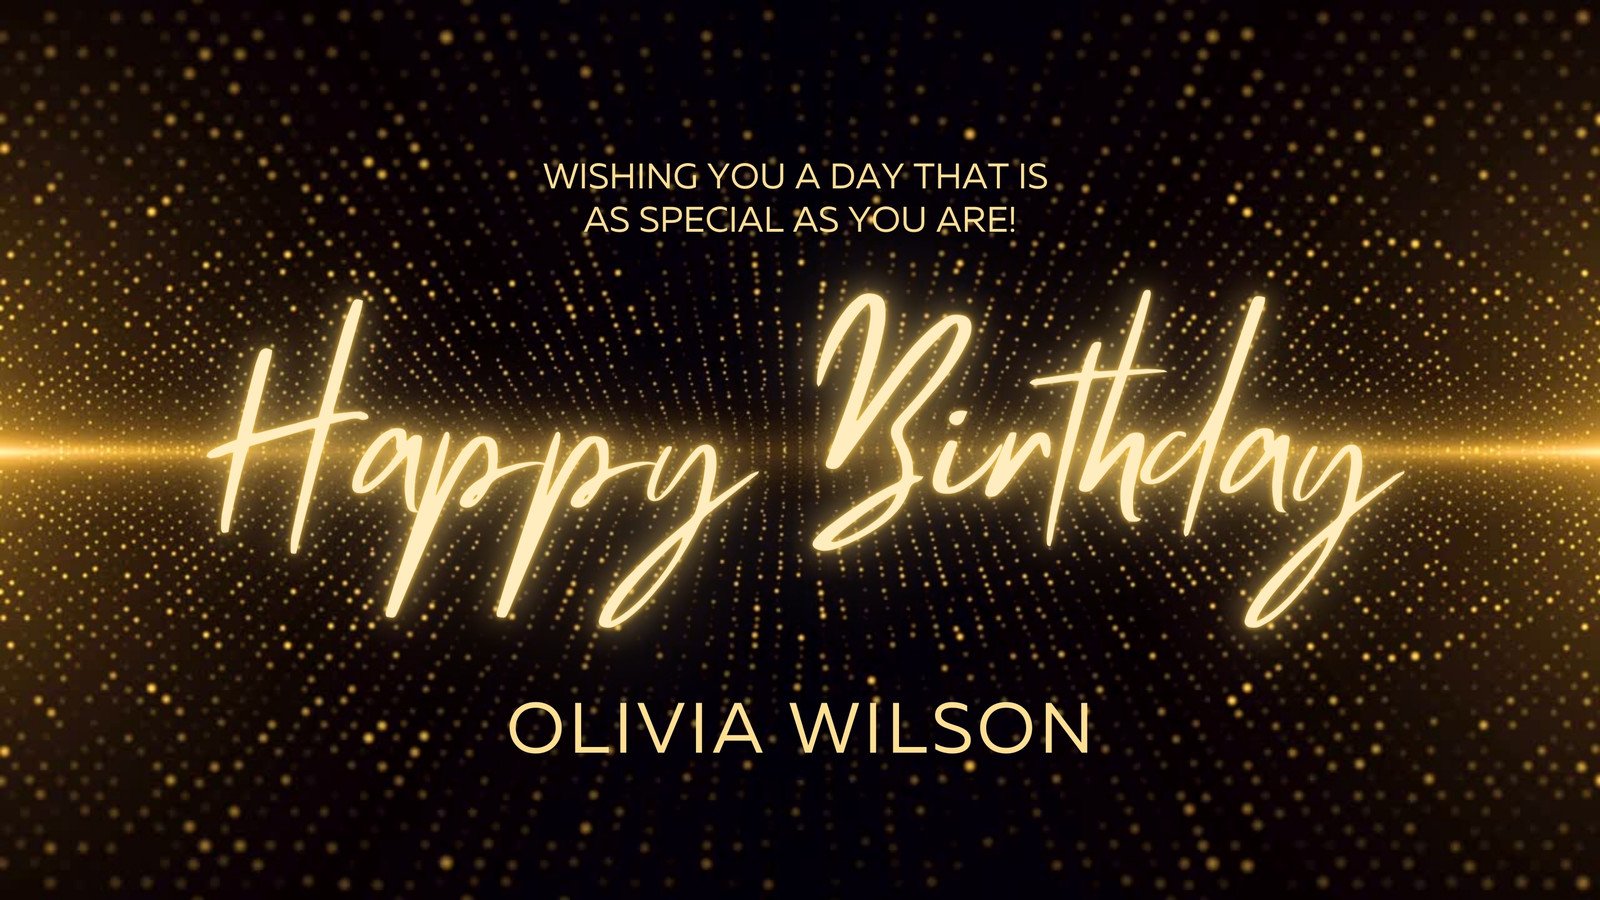 Free birthday video templates you can customize | Canva